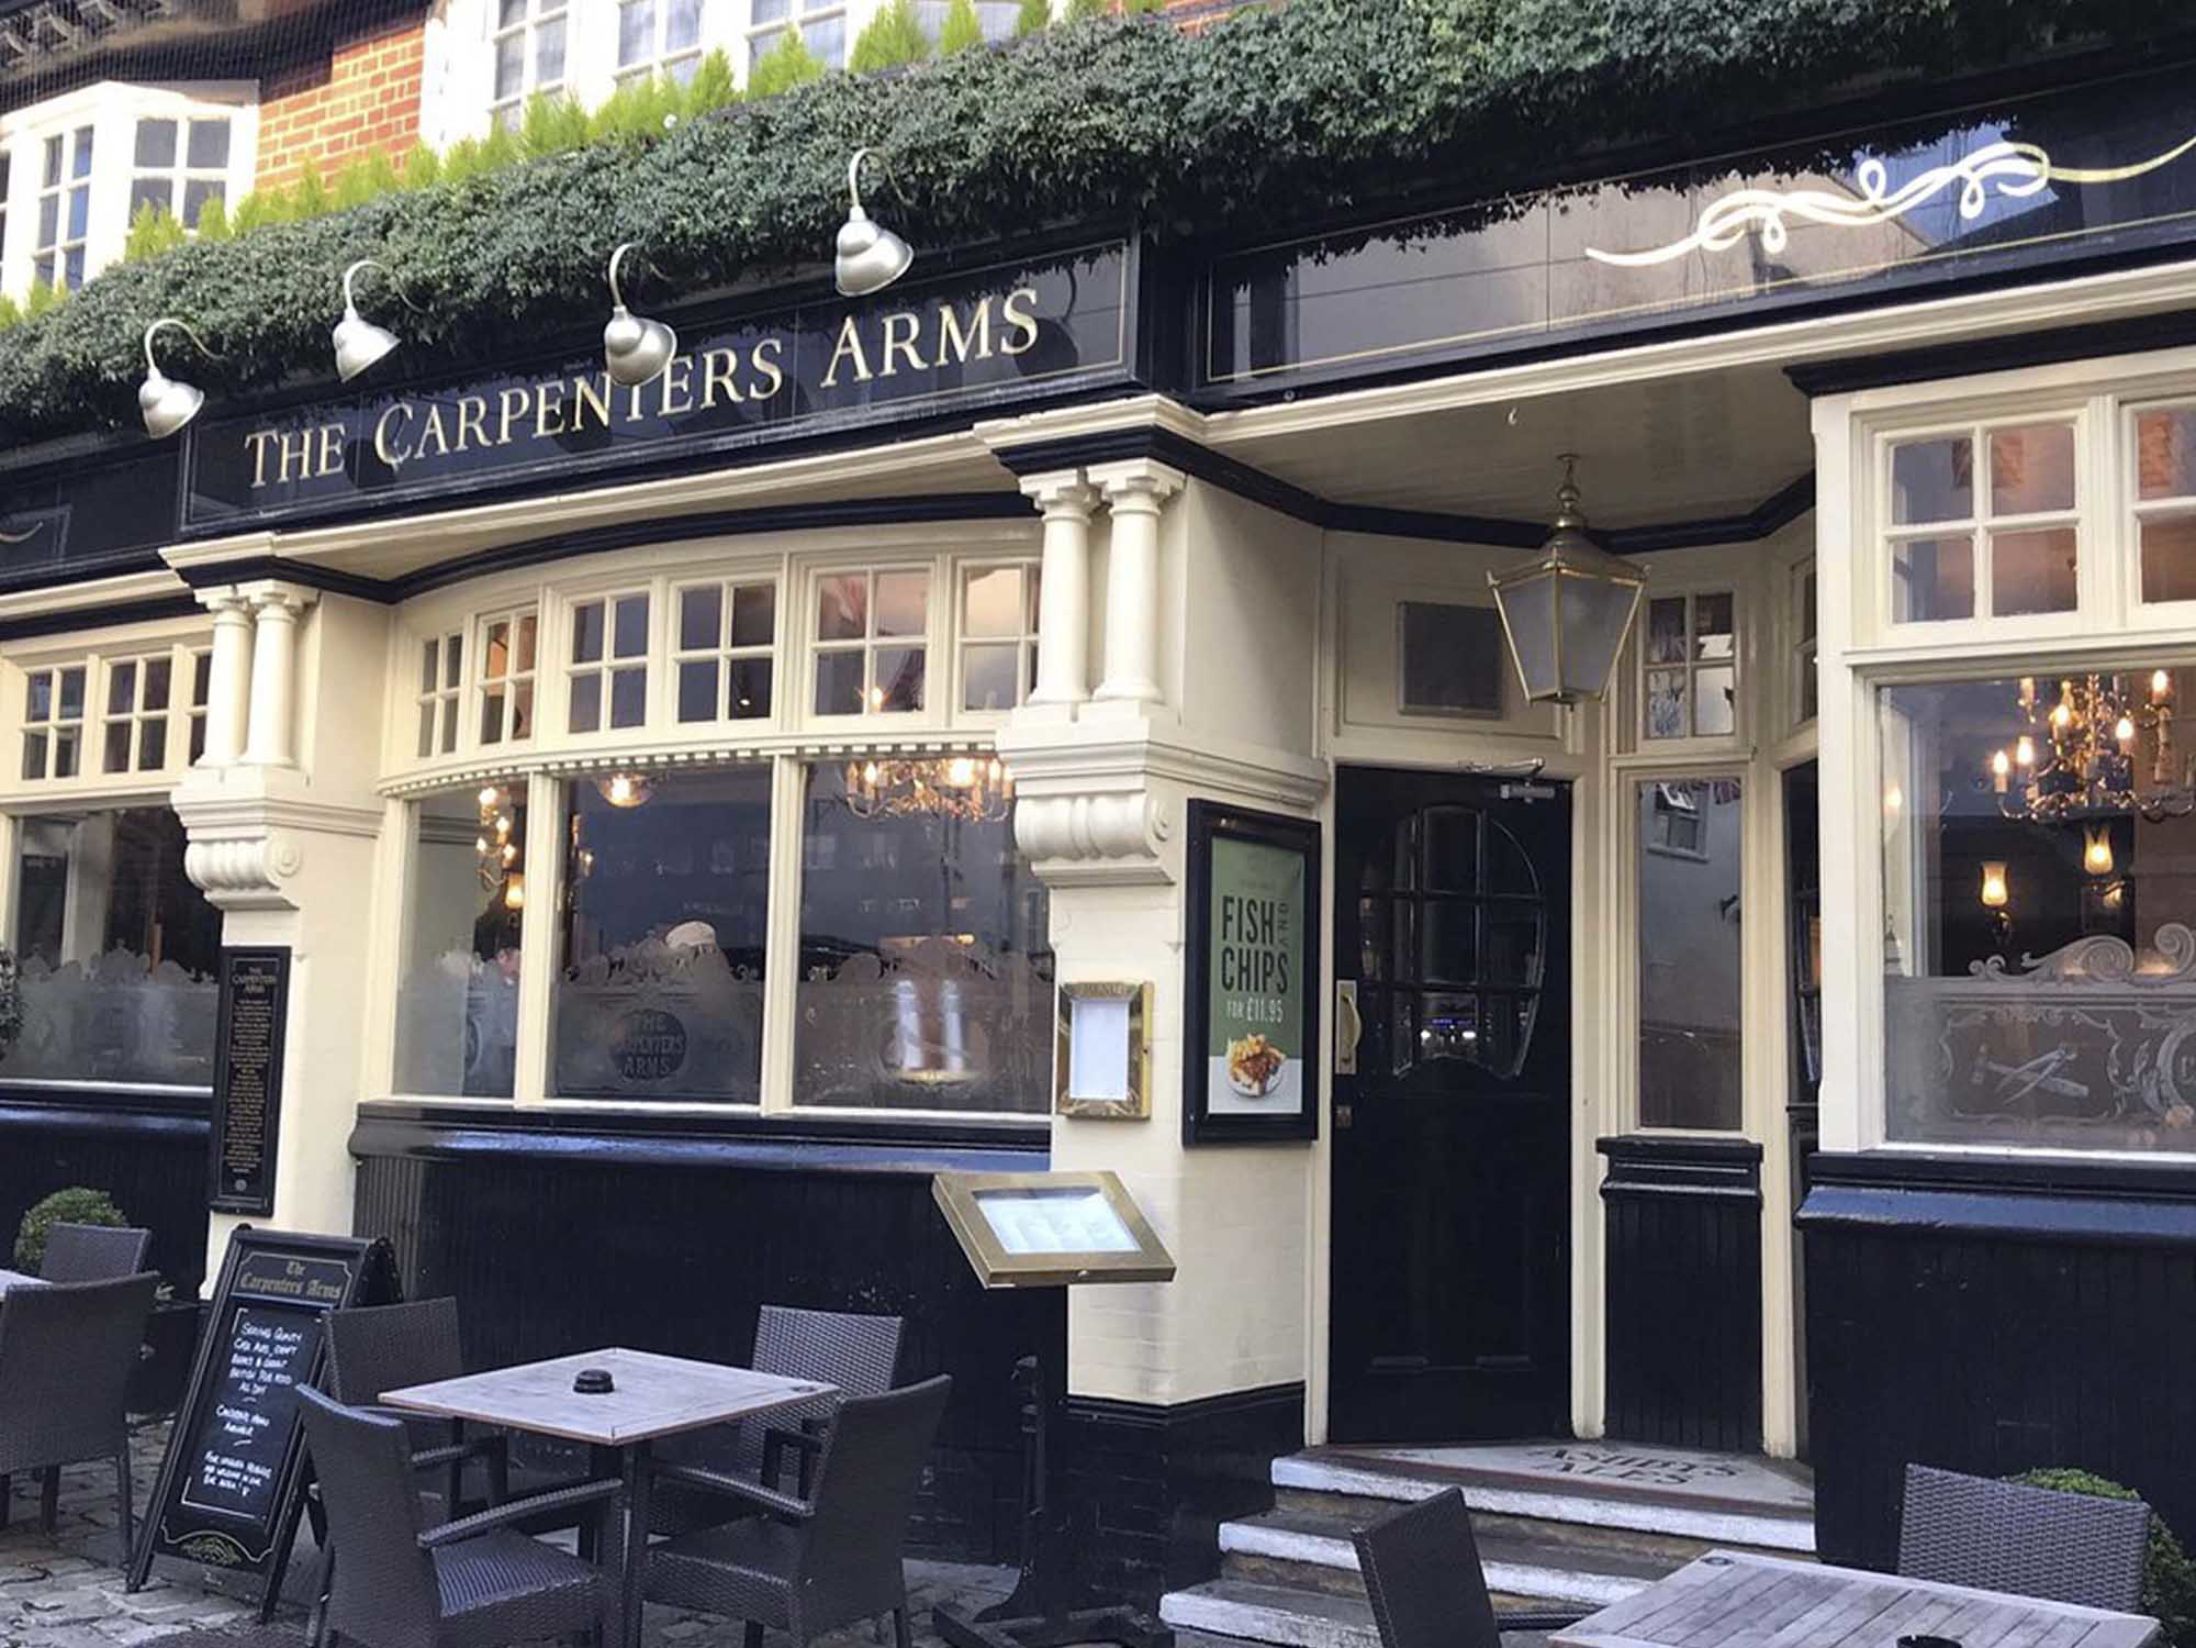 Best Pubs in Windsor - The Carpenters Arms